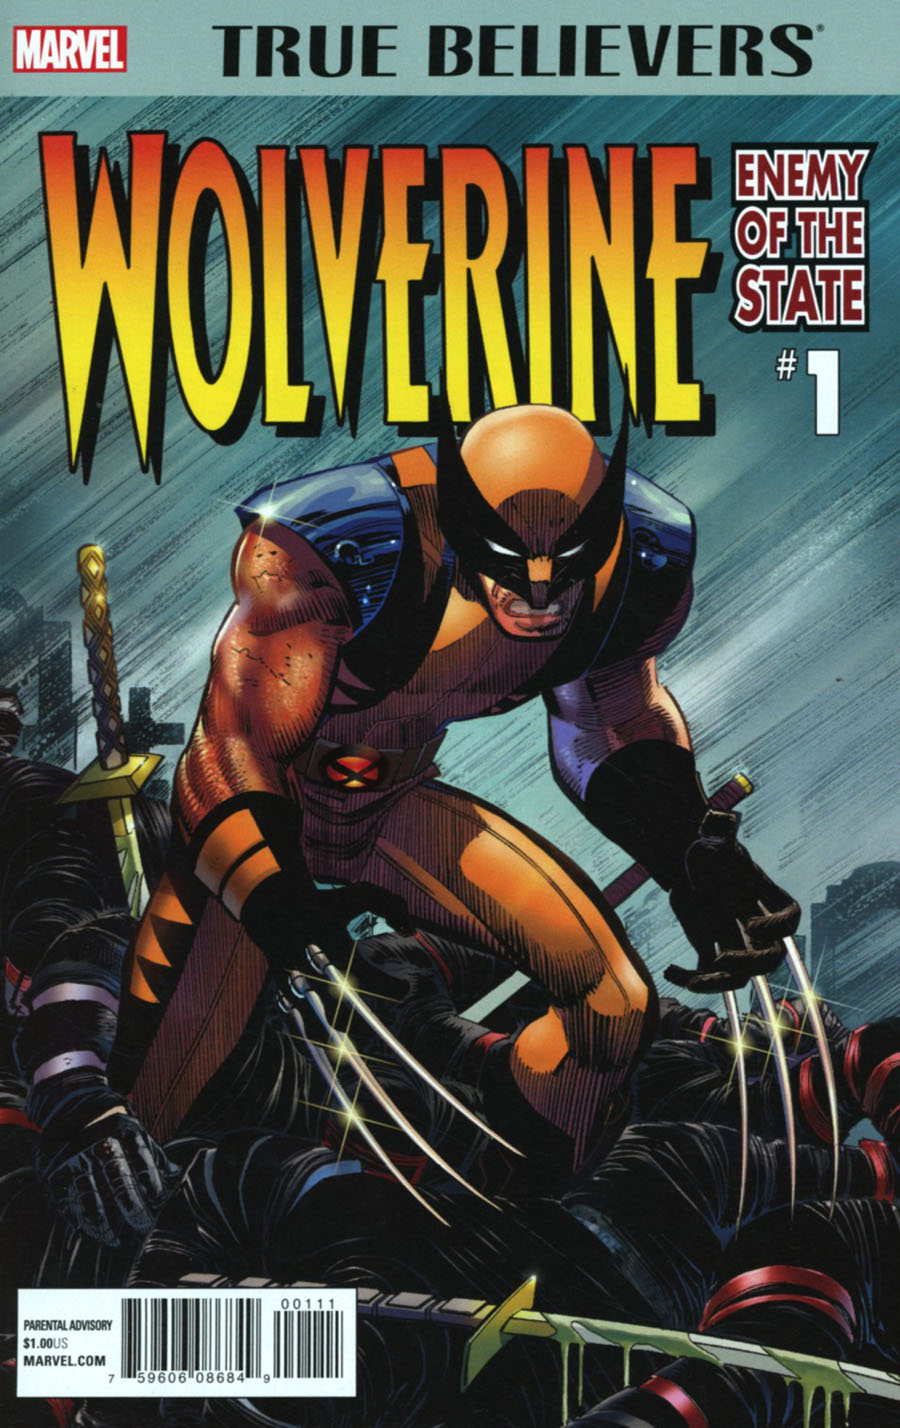 True Believers Wolverine Enemy Of The State #1